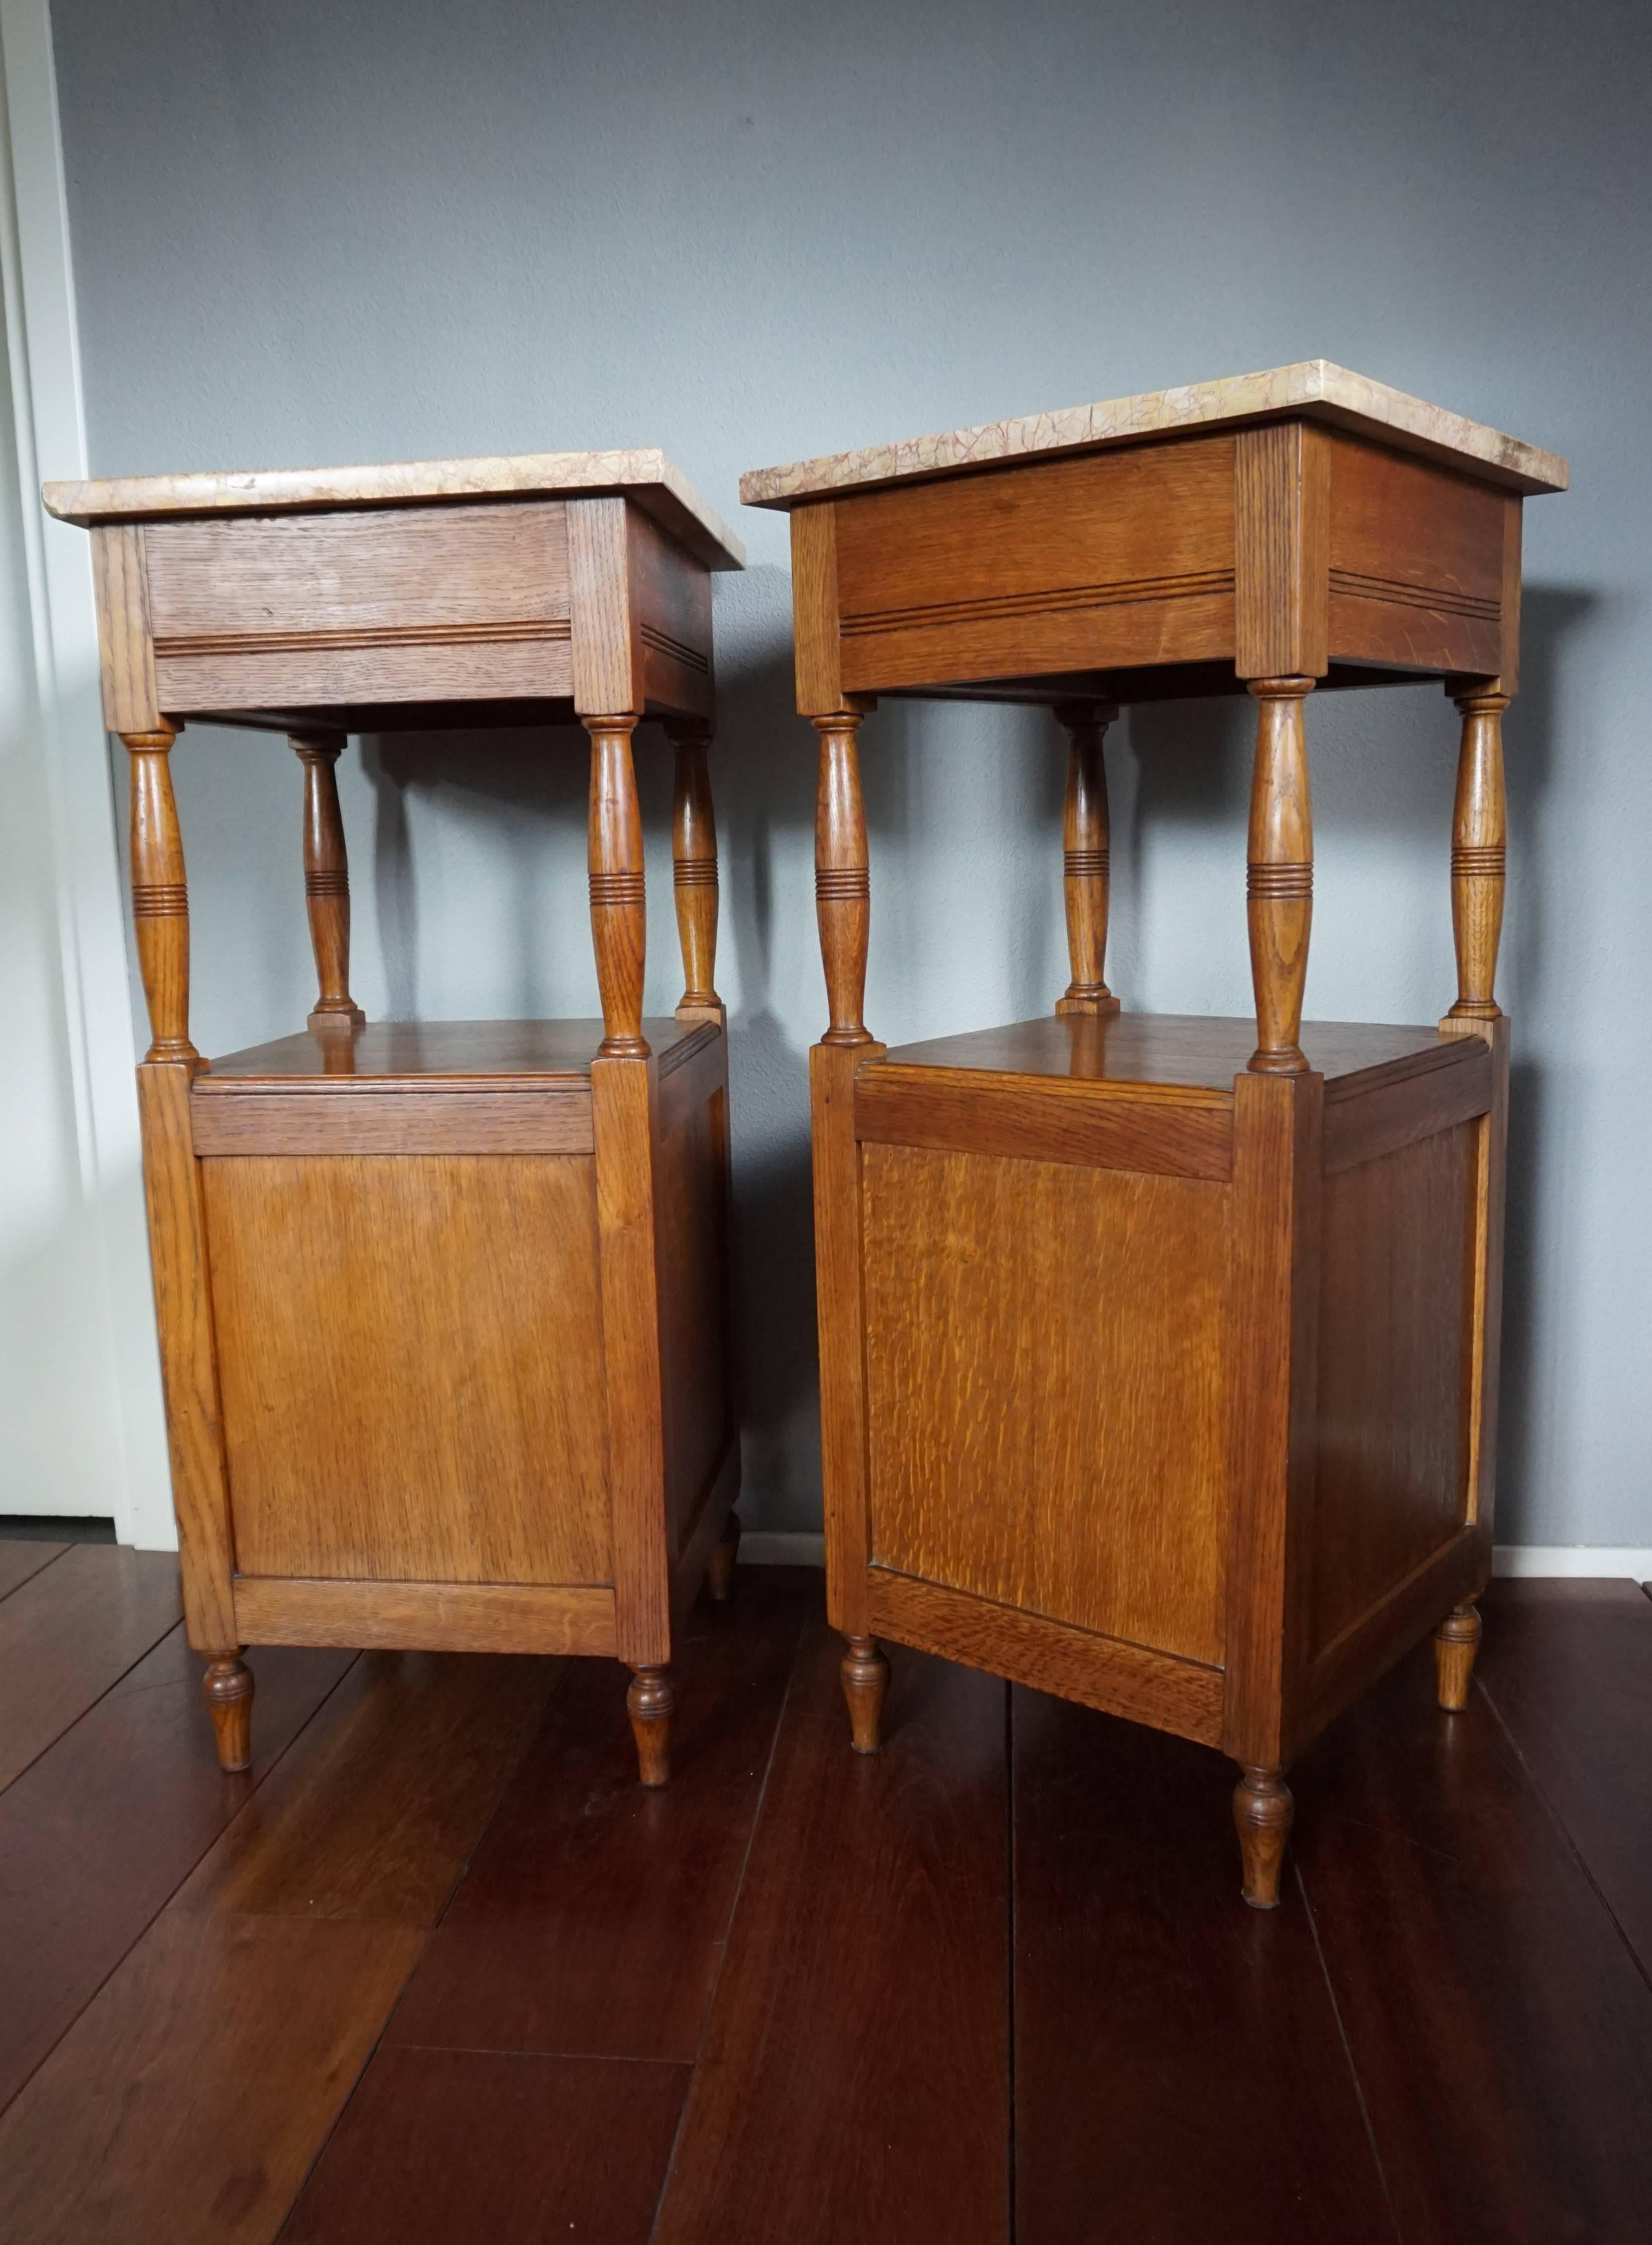 Cast Antique, Tall and Inlaid Solid Oak Bedside Cabinets with Marble Tops, A Bargain